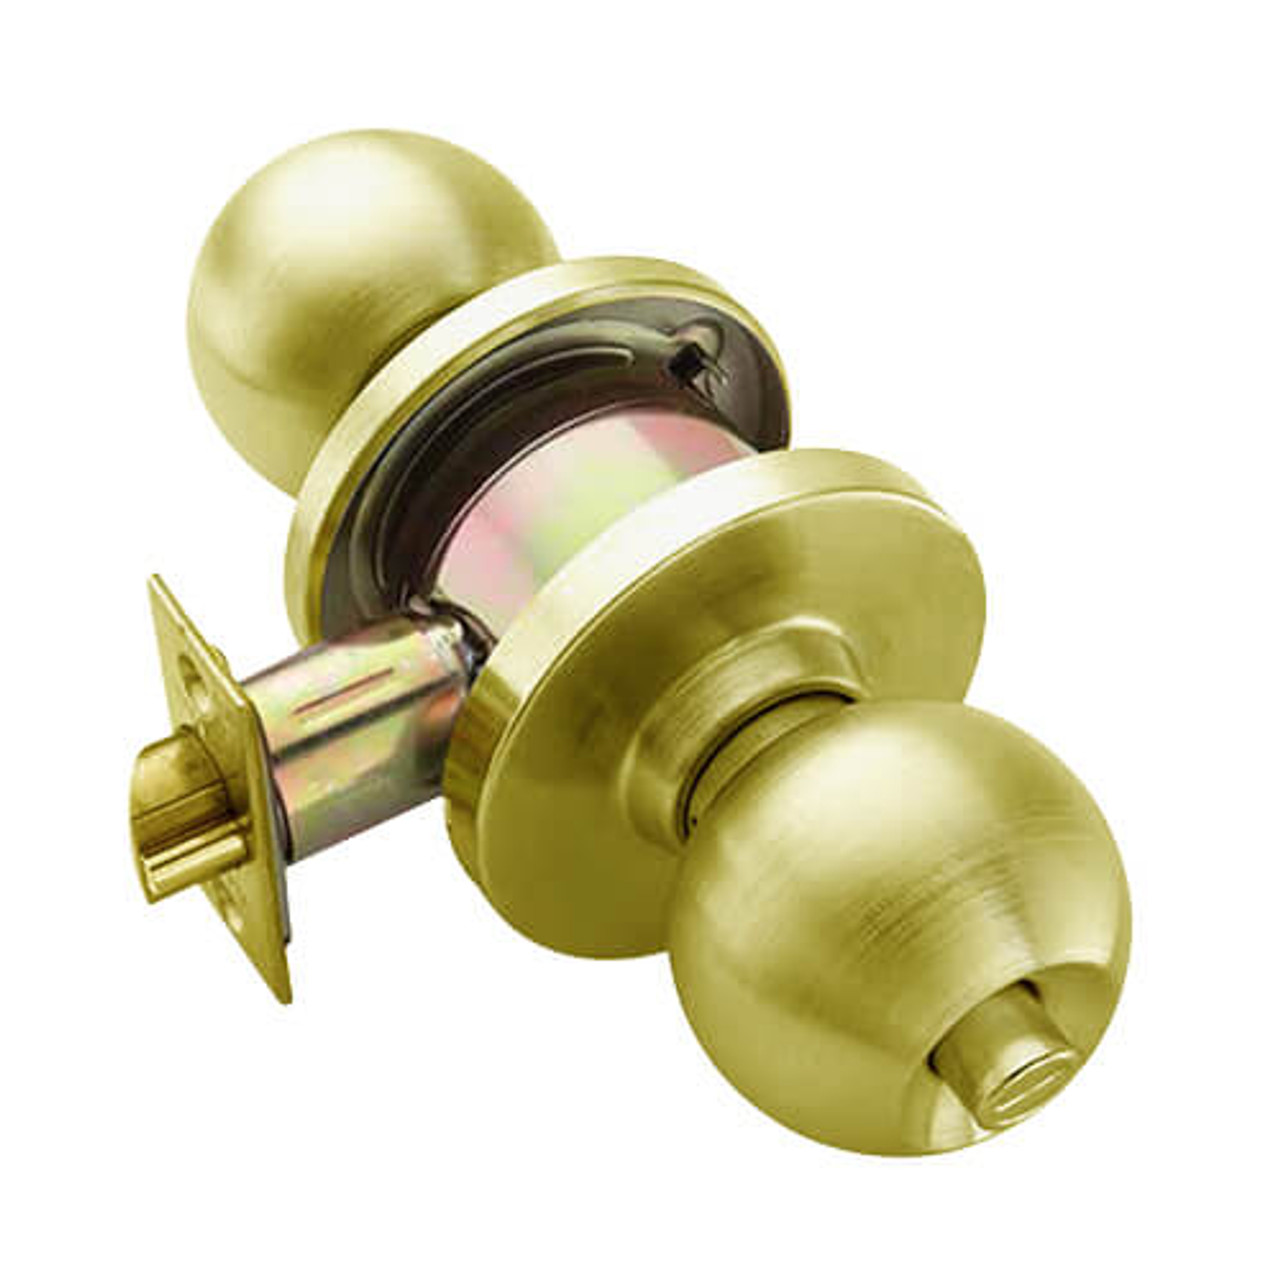 W301S-H-606 Falcon W Series Cylindrical Privacy Lock with Hana Knob Style in Satin Brass Finish